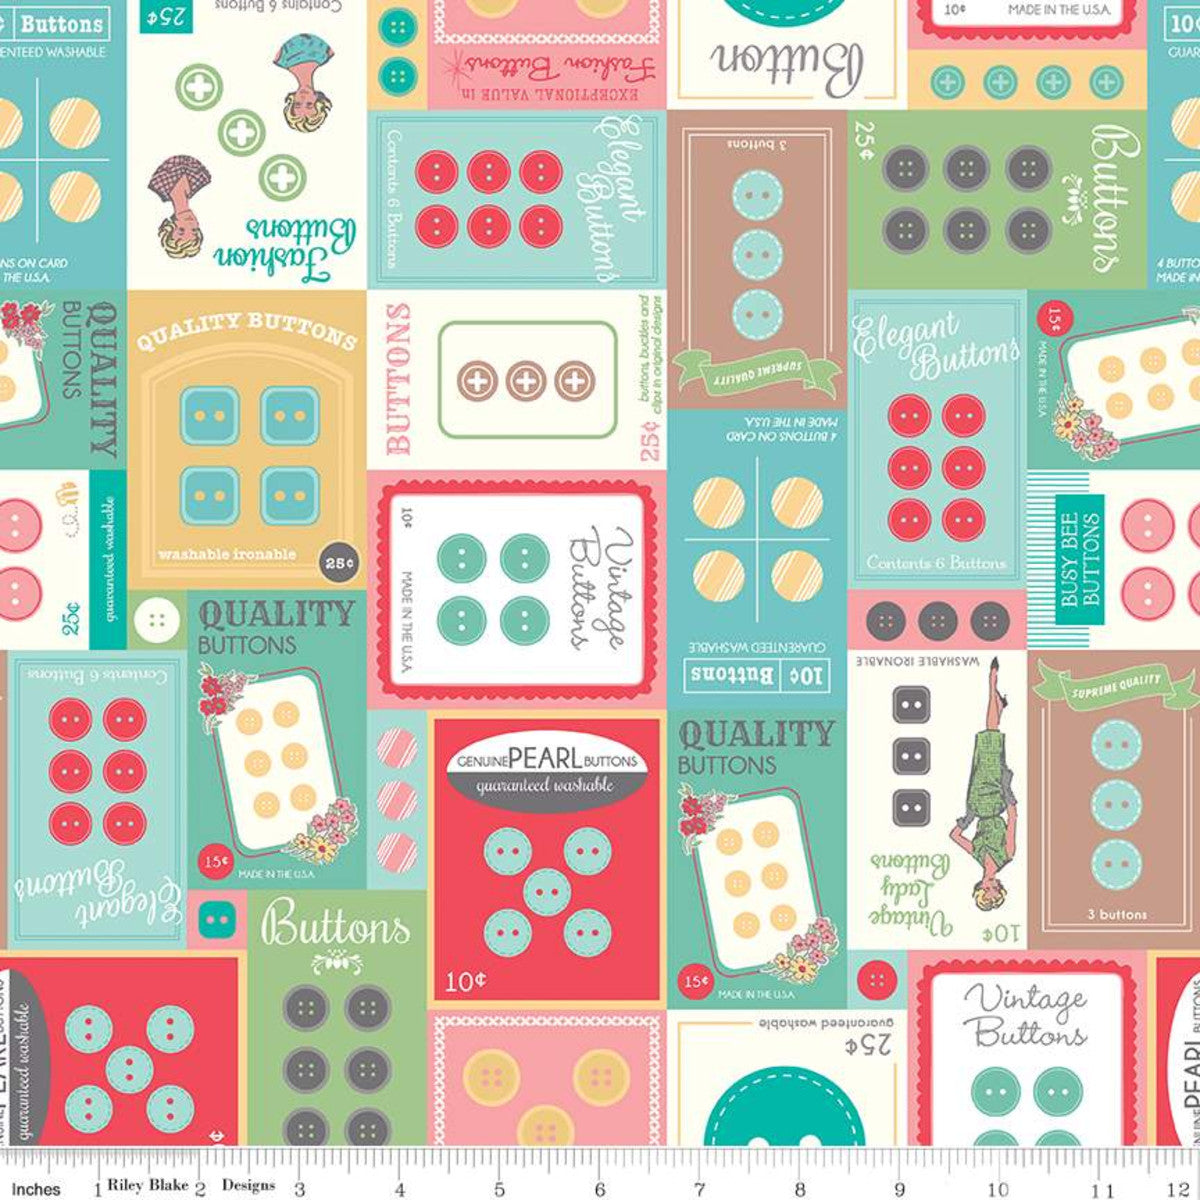 My Happy Place Home Decor Button Cards - Multi